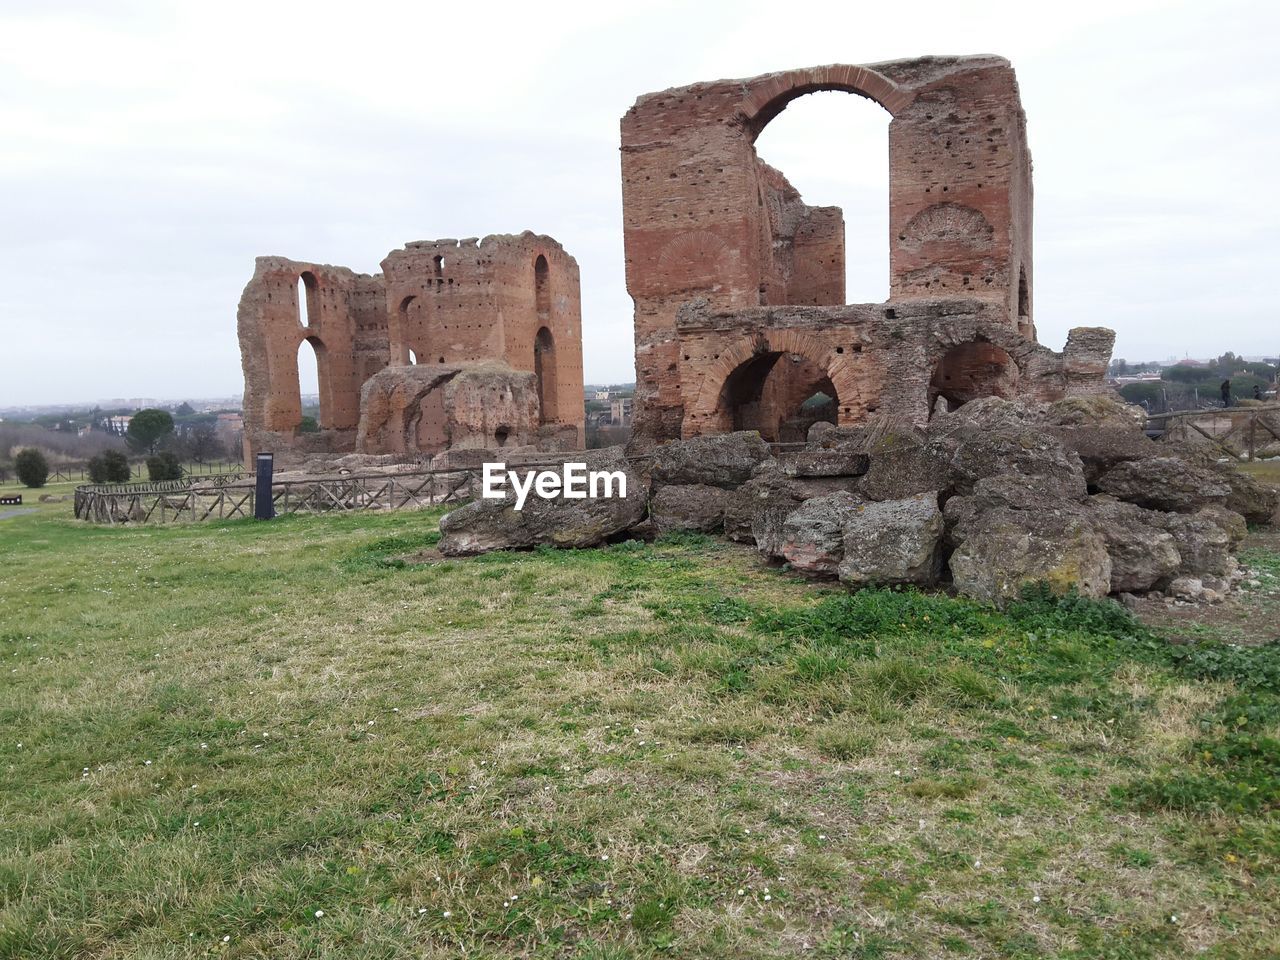 VIEW OF OLD RUIN